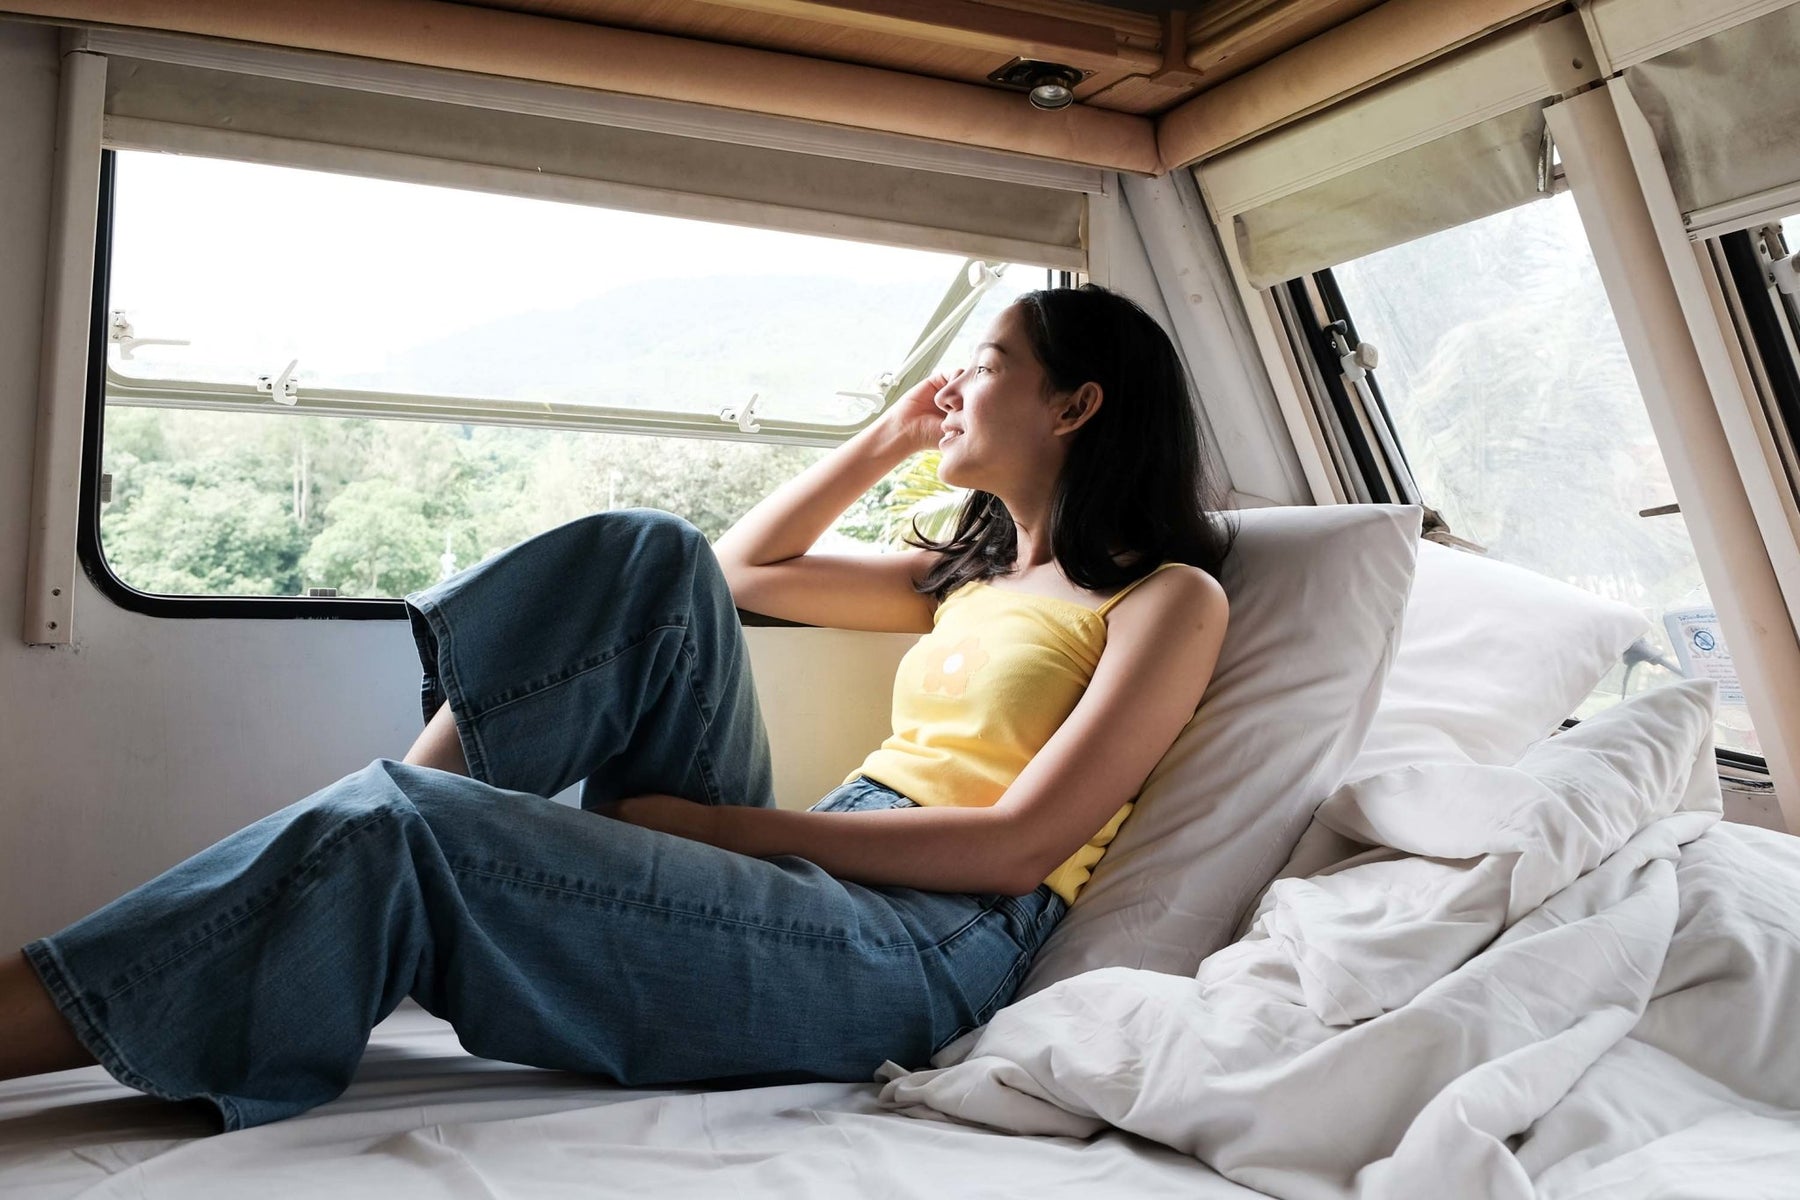 The Pros and Cons of Memory Foam vs. Innerspring RV Mattresses